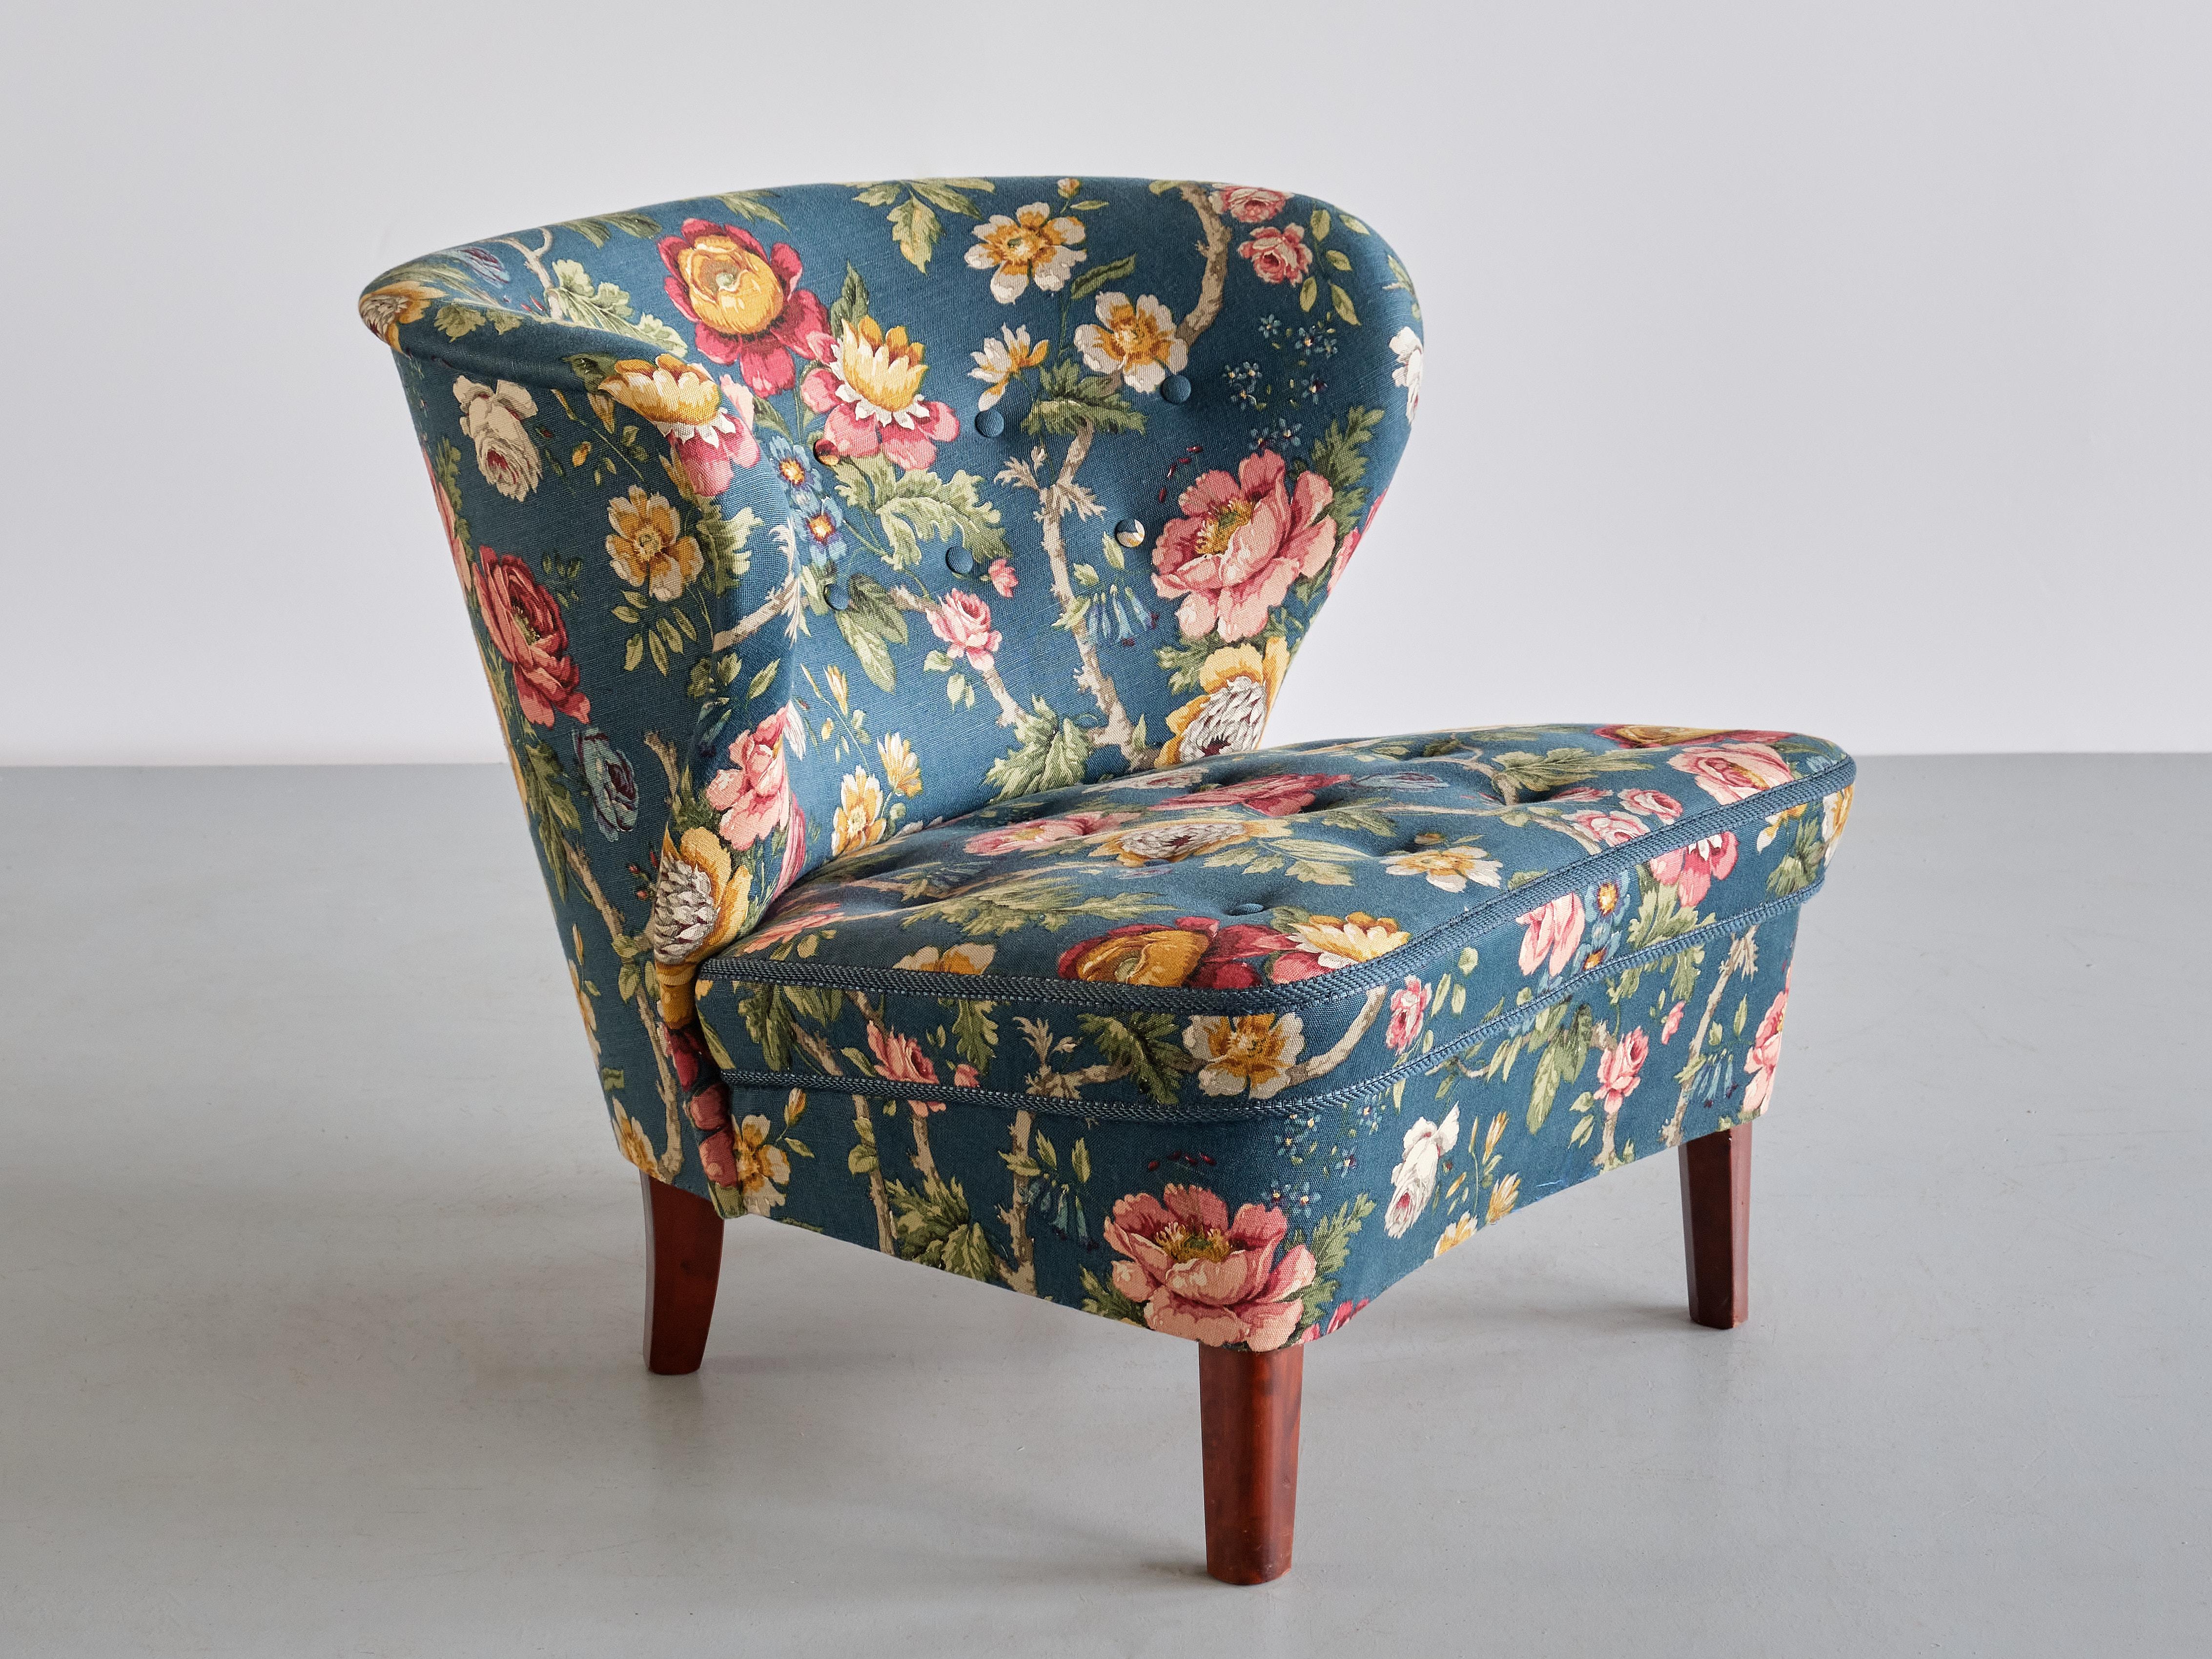 Swedish Gösta Jonsson Lounge Chair in Floral Fabric and Birch, Sweden, 1940s For Sale